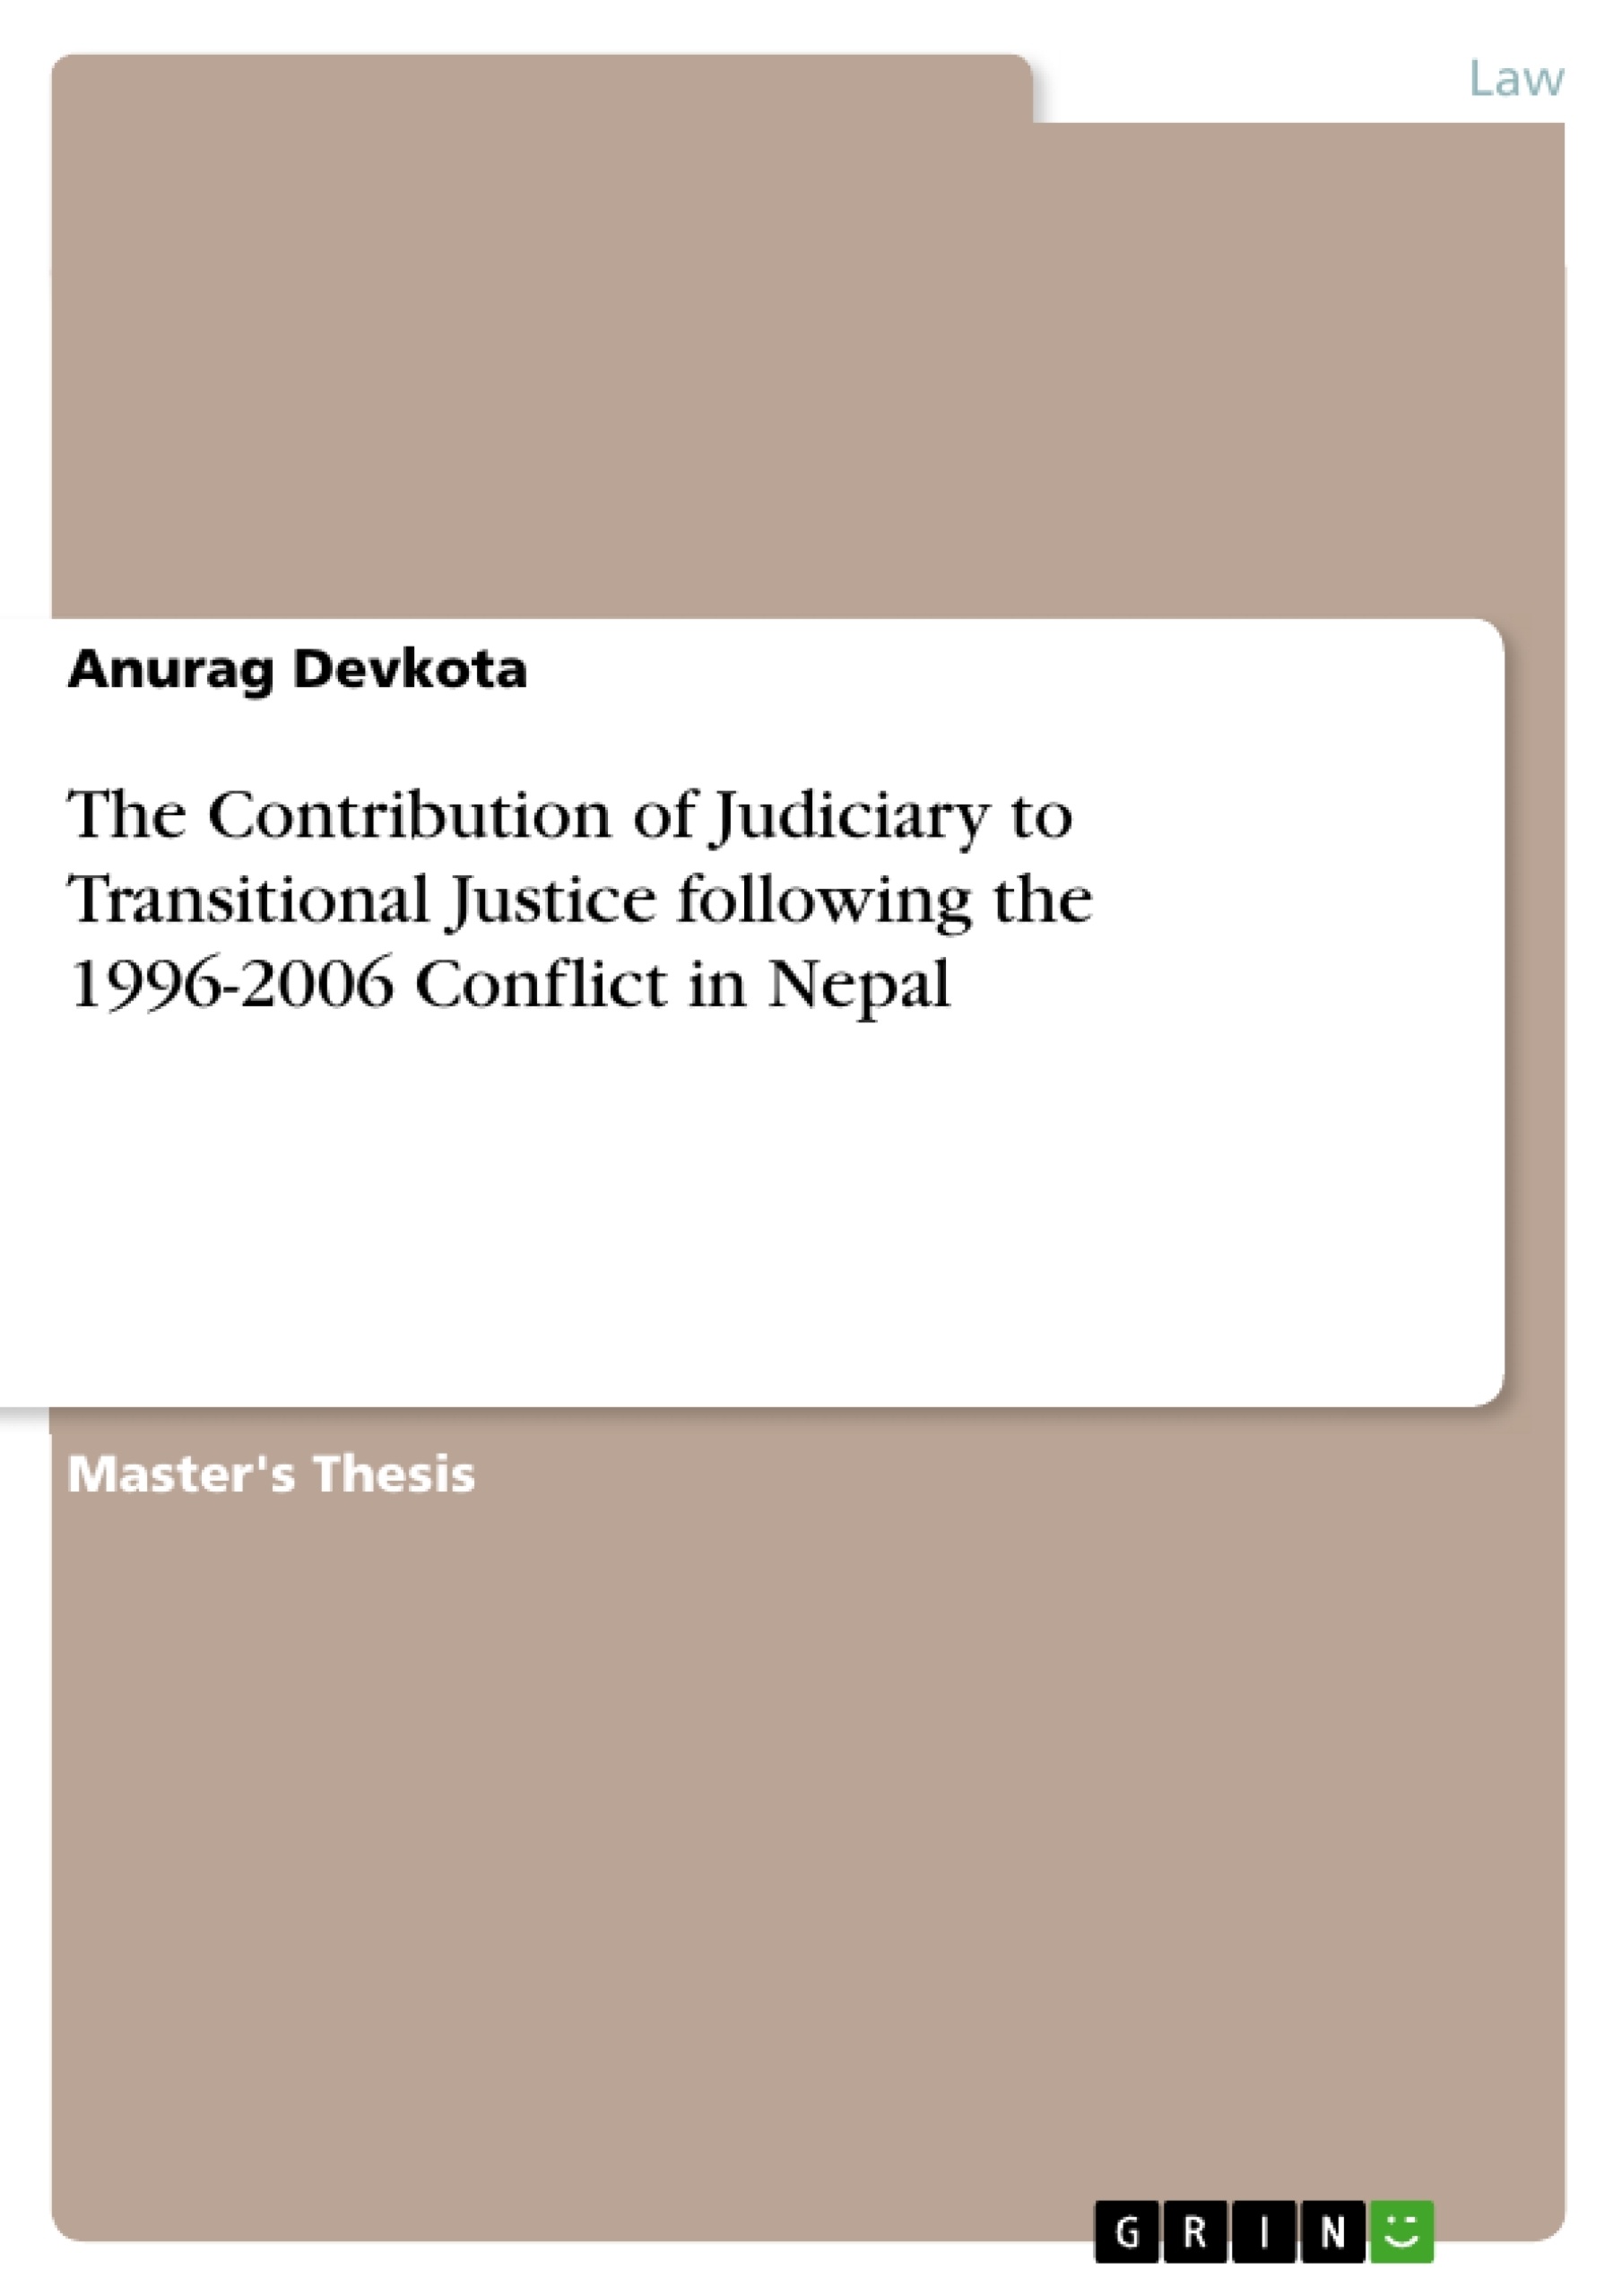 Titre: The Contribution of Judiciary to Transitional Justice following the 1996-2006 Conflict in Nepal